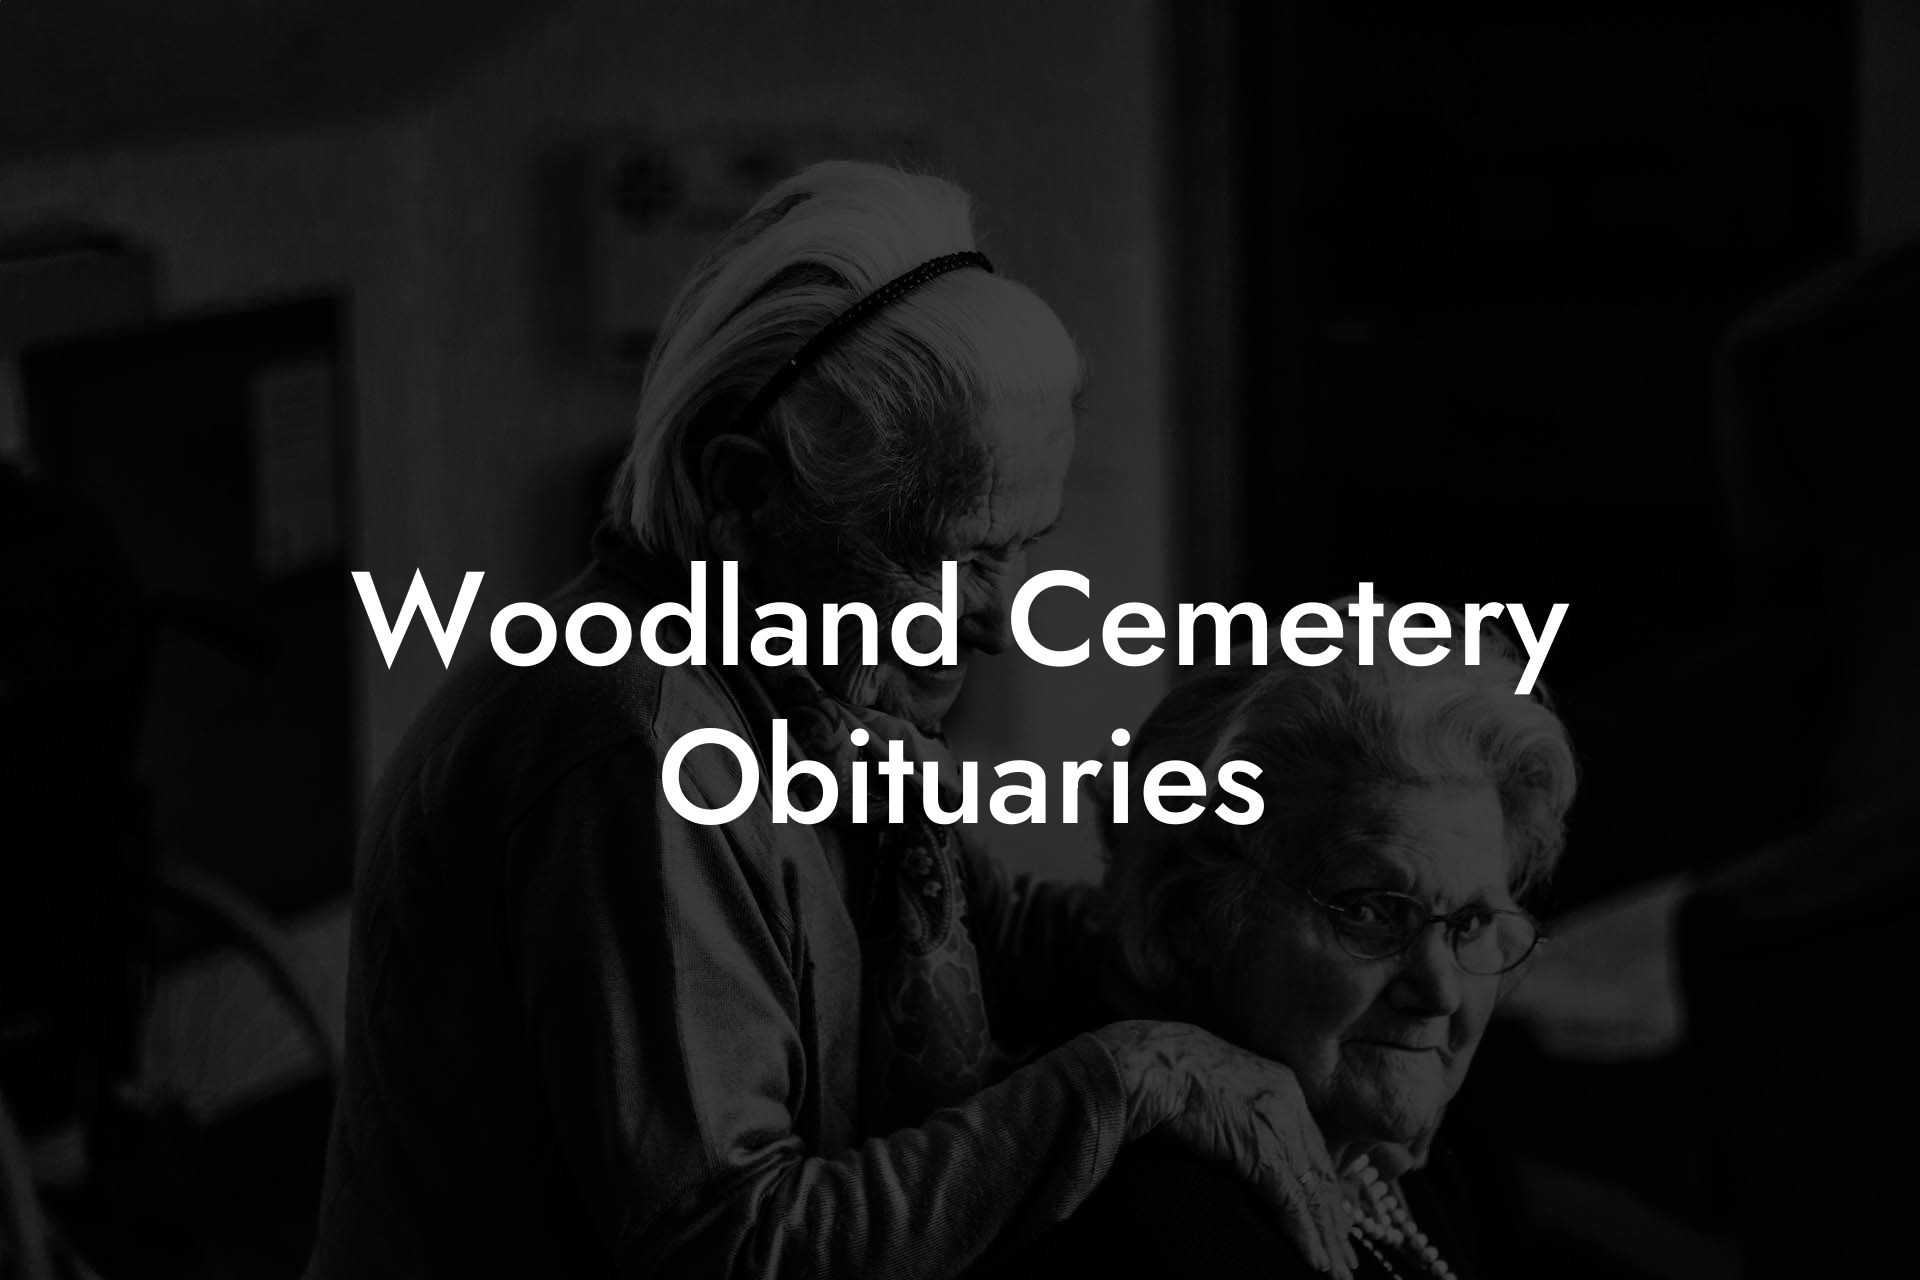 Woodland Cemetery Obituaries